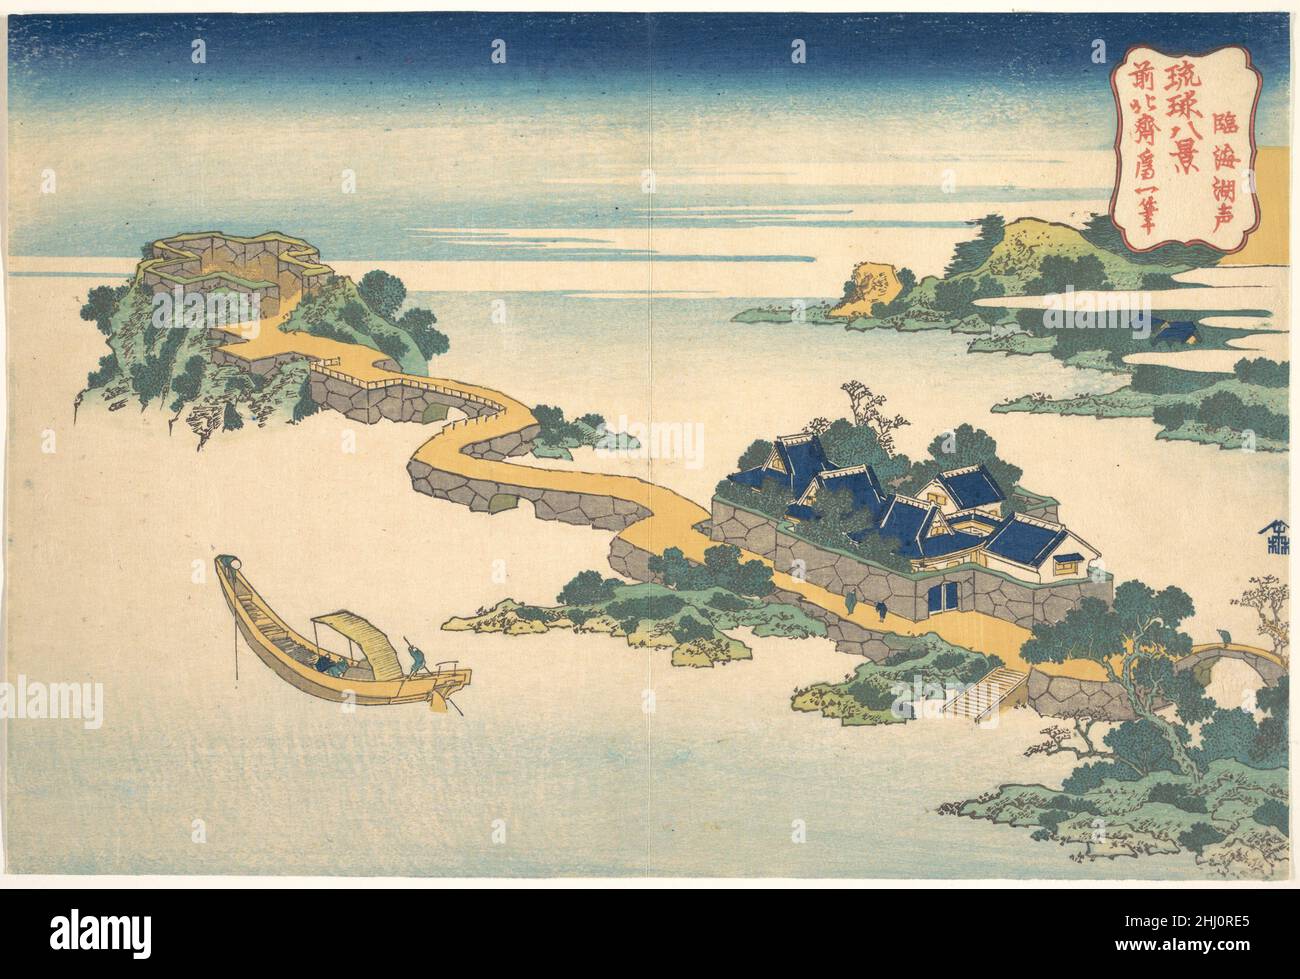 Sound of the Lake at Rinkai (Rinkai kosei), from the series Eight Views of the Ryūkyū Islands (Ryūkyū hakkei) ca. 1832 Katsushika Hokusai Japanese Hokusai's prints of the Ryūkyū were probably made to commemorate the Ryūkyū mission's arrival at Edo in November 1832. Although the original gazetteer that inspired Hokusai was in black and white, his series is in exquisite color. We can see not only his use of color to heighten the exotic ambiance of the Ryūkyū Islands, but also his imaginative power to make alien islands familiar in the guise of Eight Views. The artist carefully selected represent Stock Photo